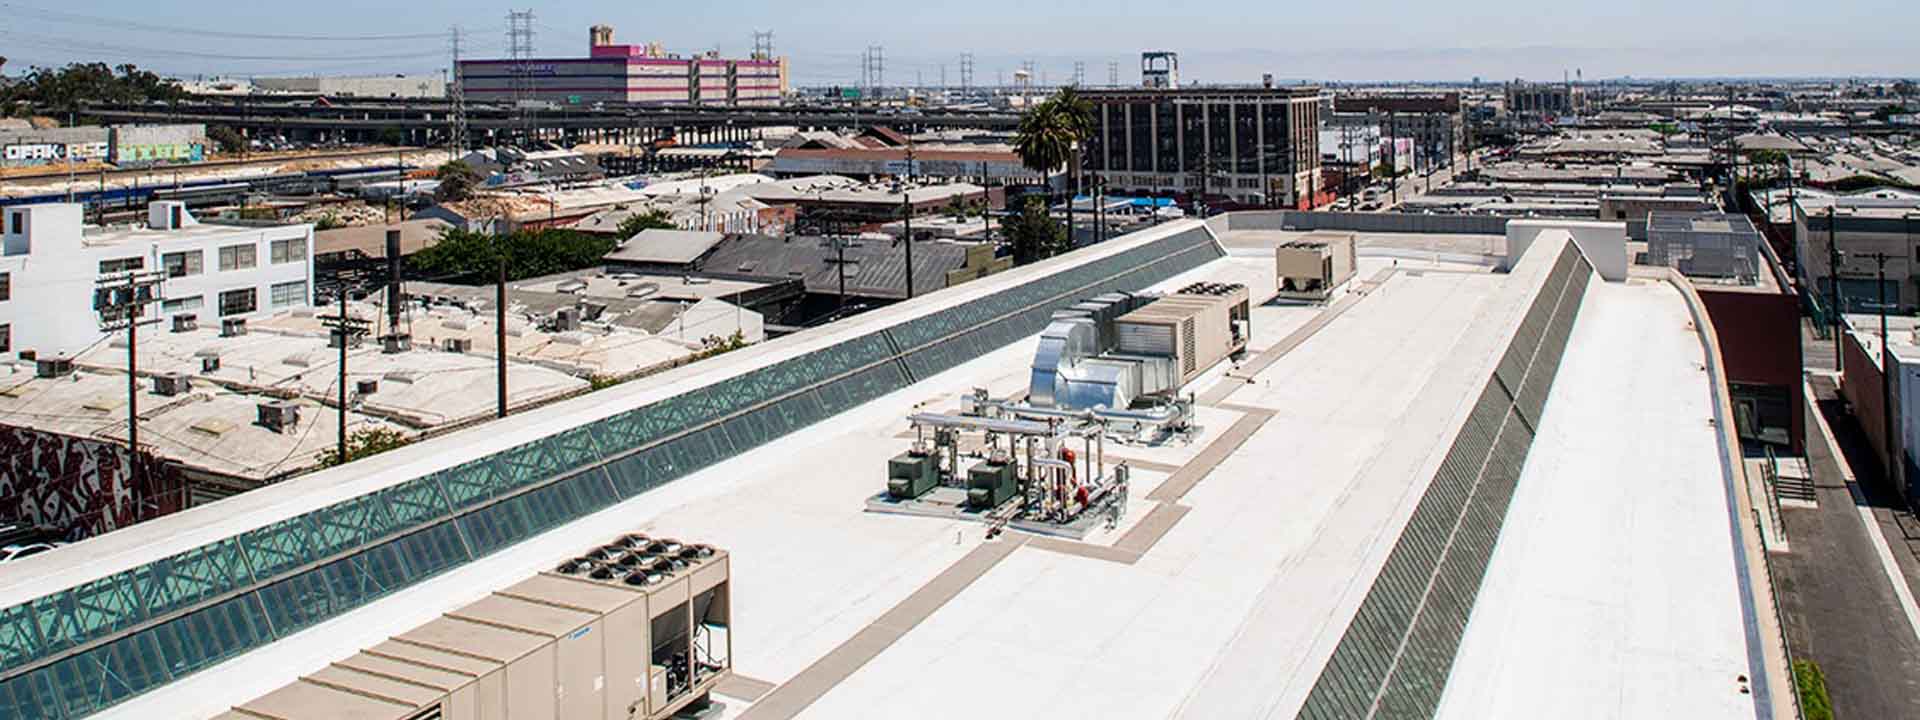 Office Commercial Roofing Contractor - Los Angeles